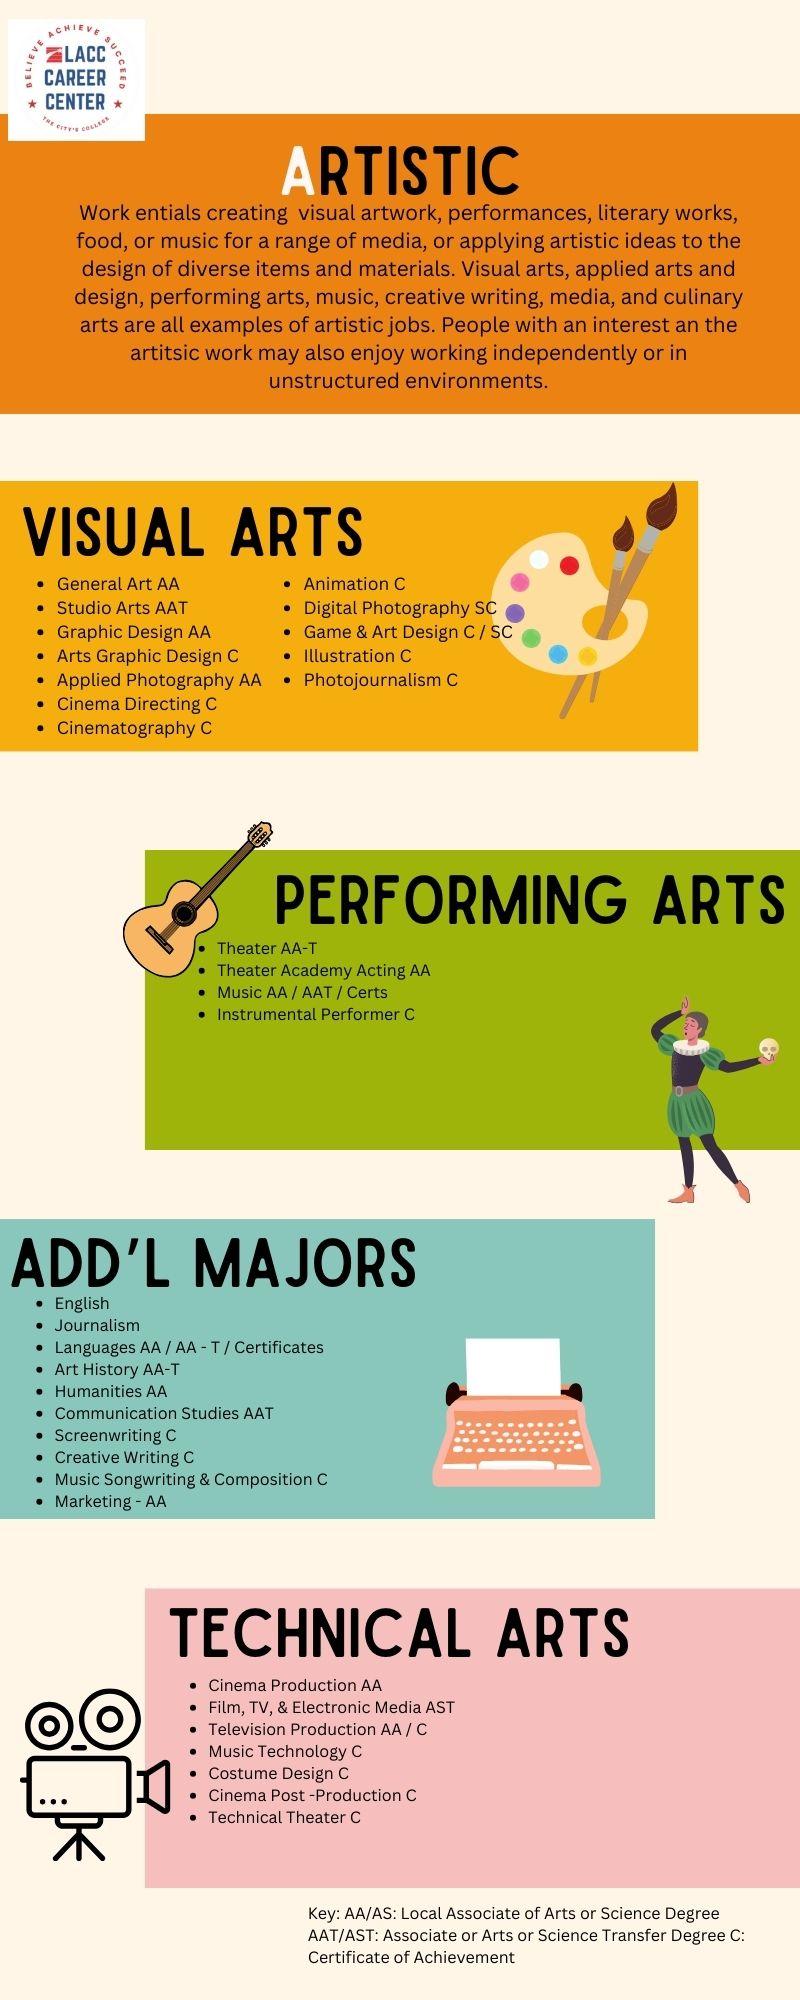 Infographic Listing LACC Majors with Artistic Themes